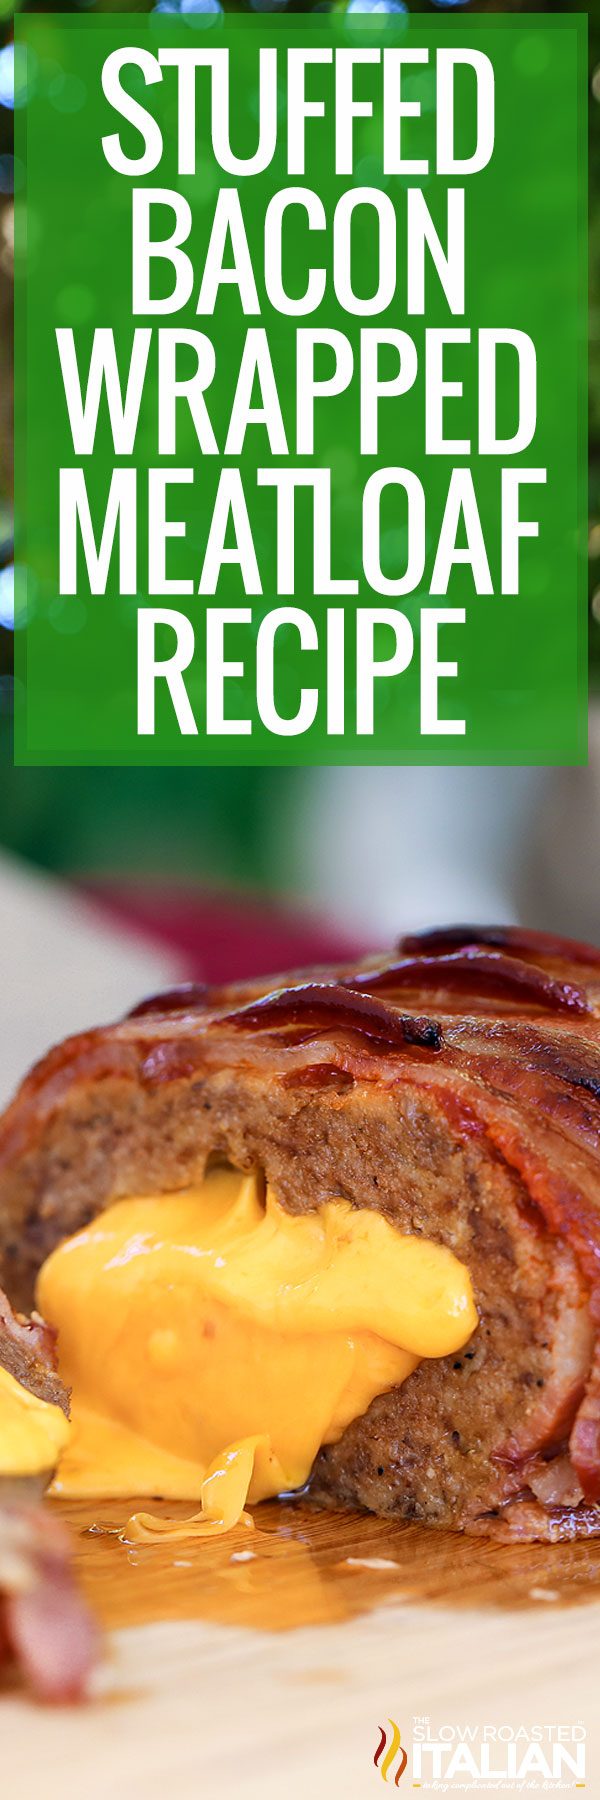 titled image for stuffed bacon wrapped meatloaf